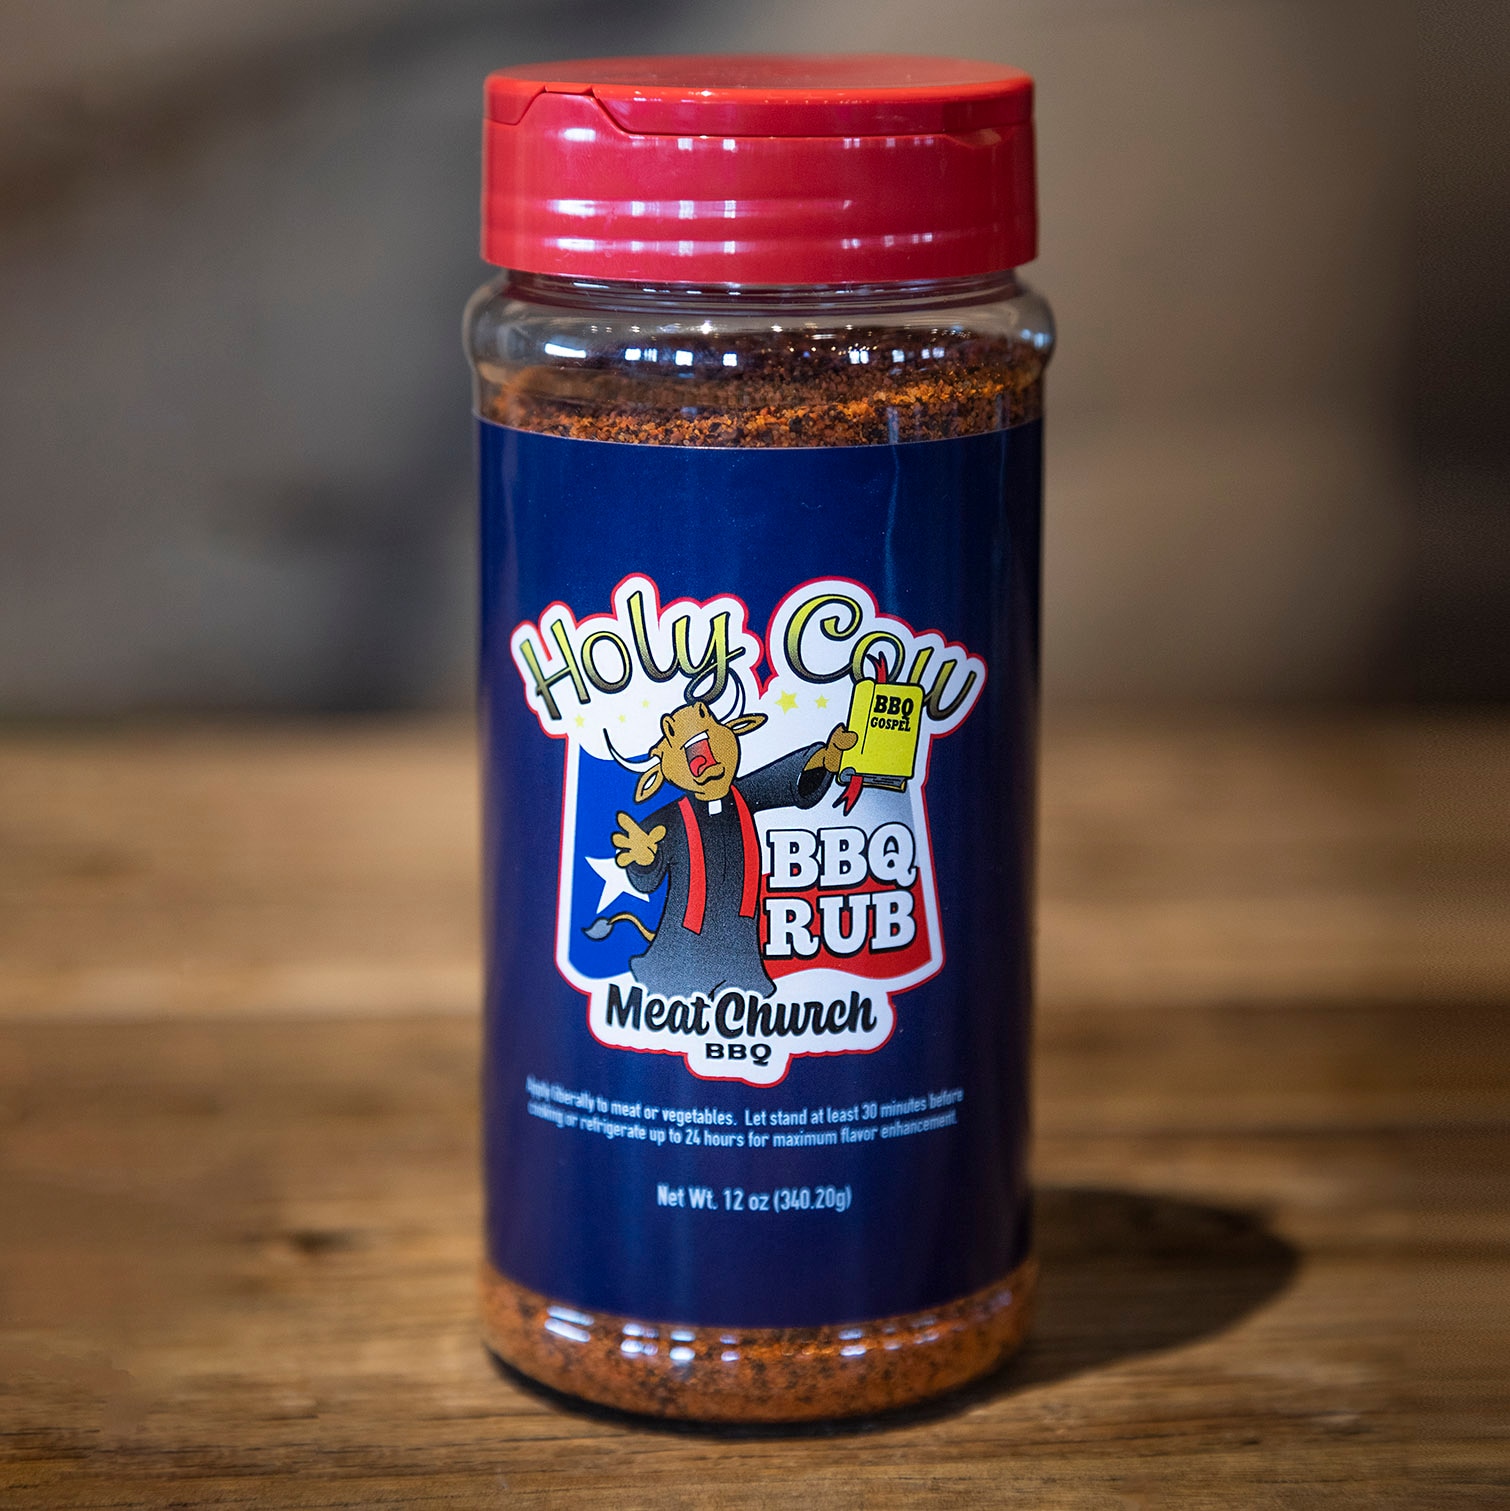 Meat Church BBQ Rub Combo: Honey Hog (14 oz) and The Gospel (14 oz) BBQ Rub  and Seasoning for Meat and Vegetables, Gluten Free, One Bottle of Each